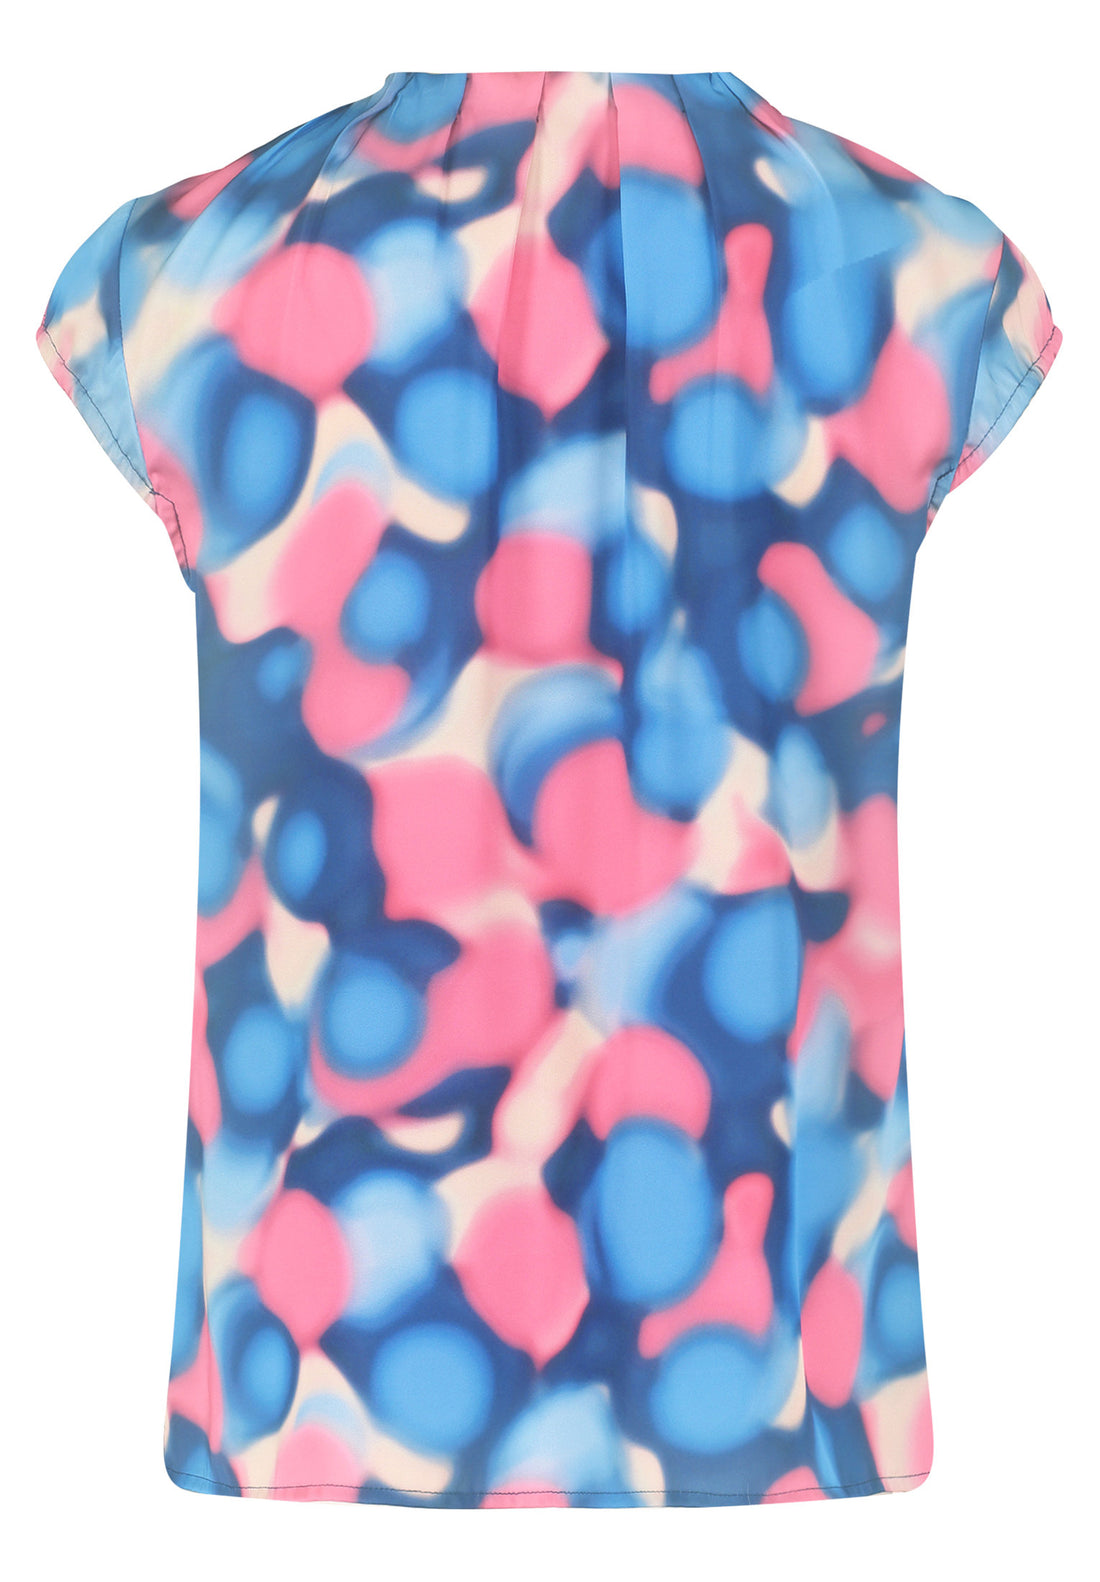 Cap Sleeve Highneck Blouse With All Over Print_8731 3318_8845_02